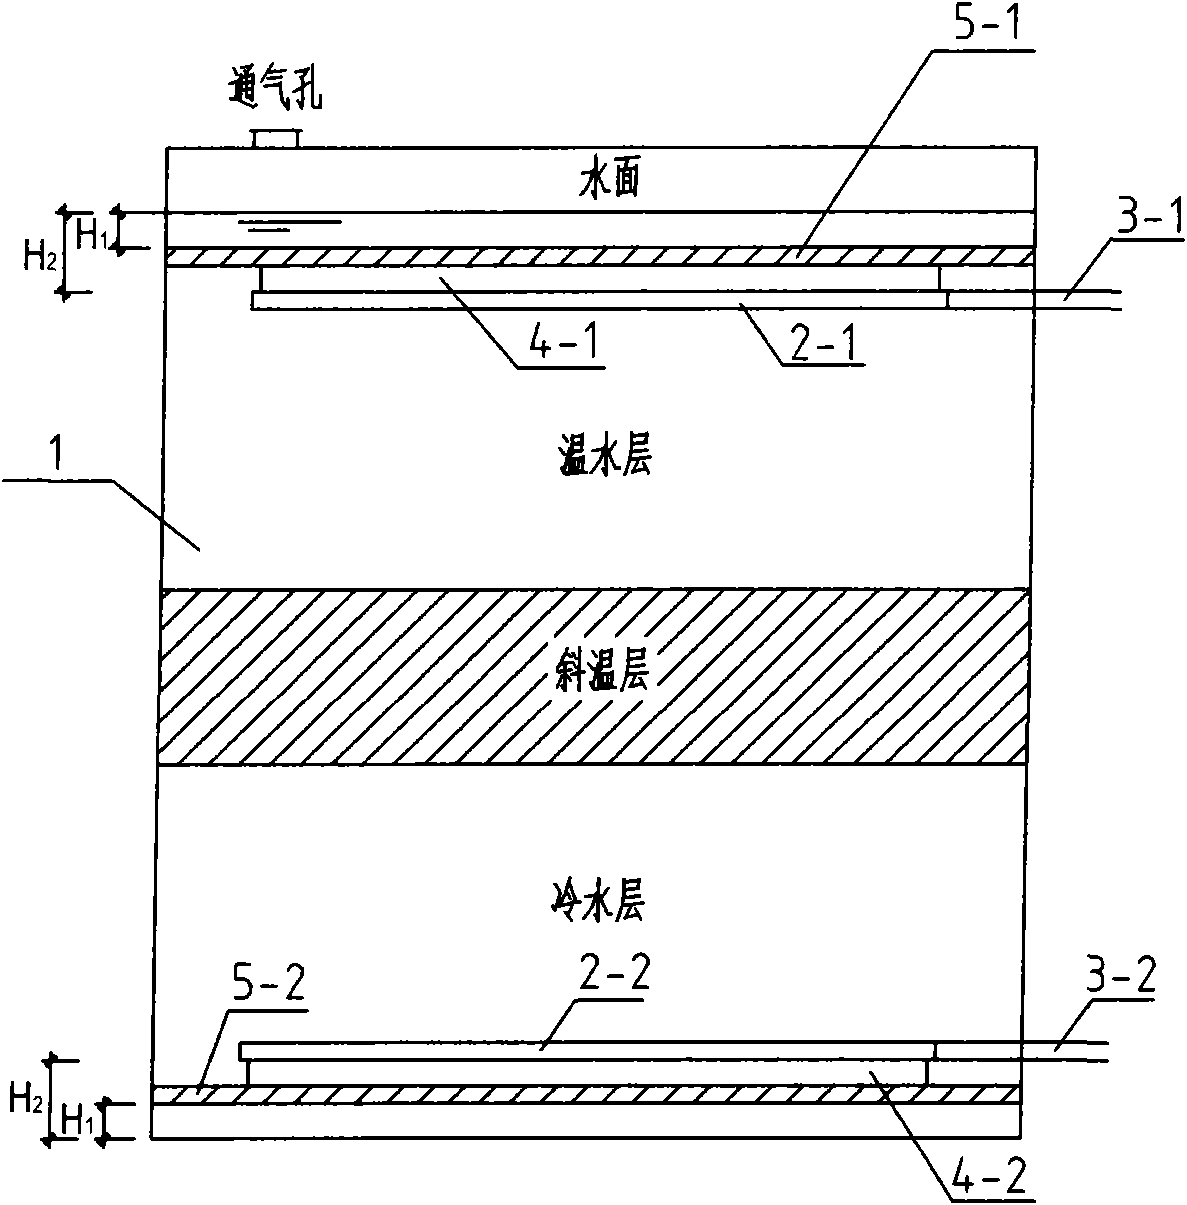 Natural layering water cold accumulation device